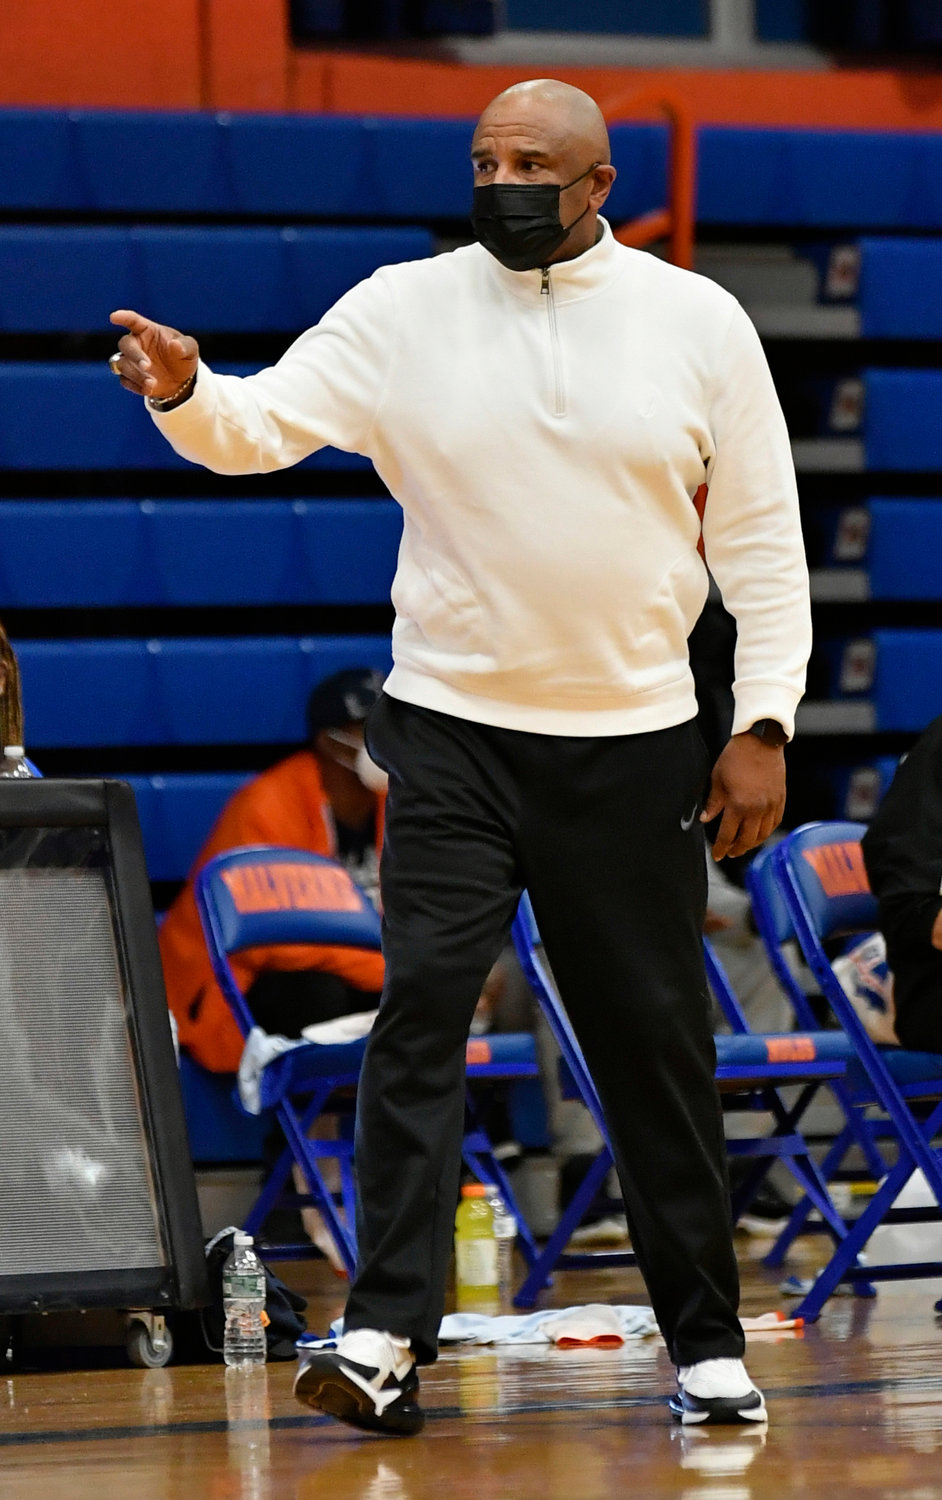 Malverne boys' basketball head coach Darrol Lopez entered the season four wins away from reaching 300 for his career and got the historic victory Dec. 29.